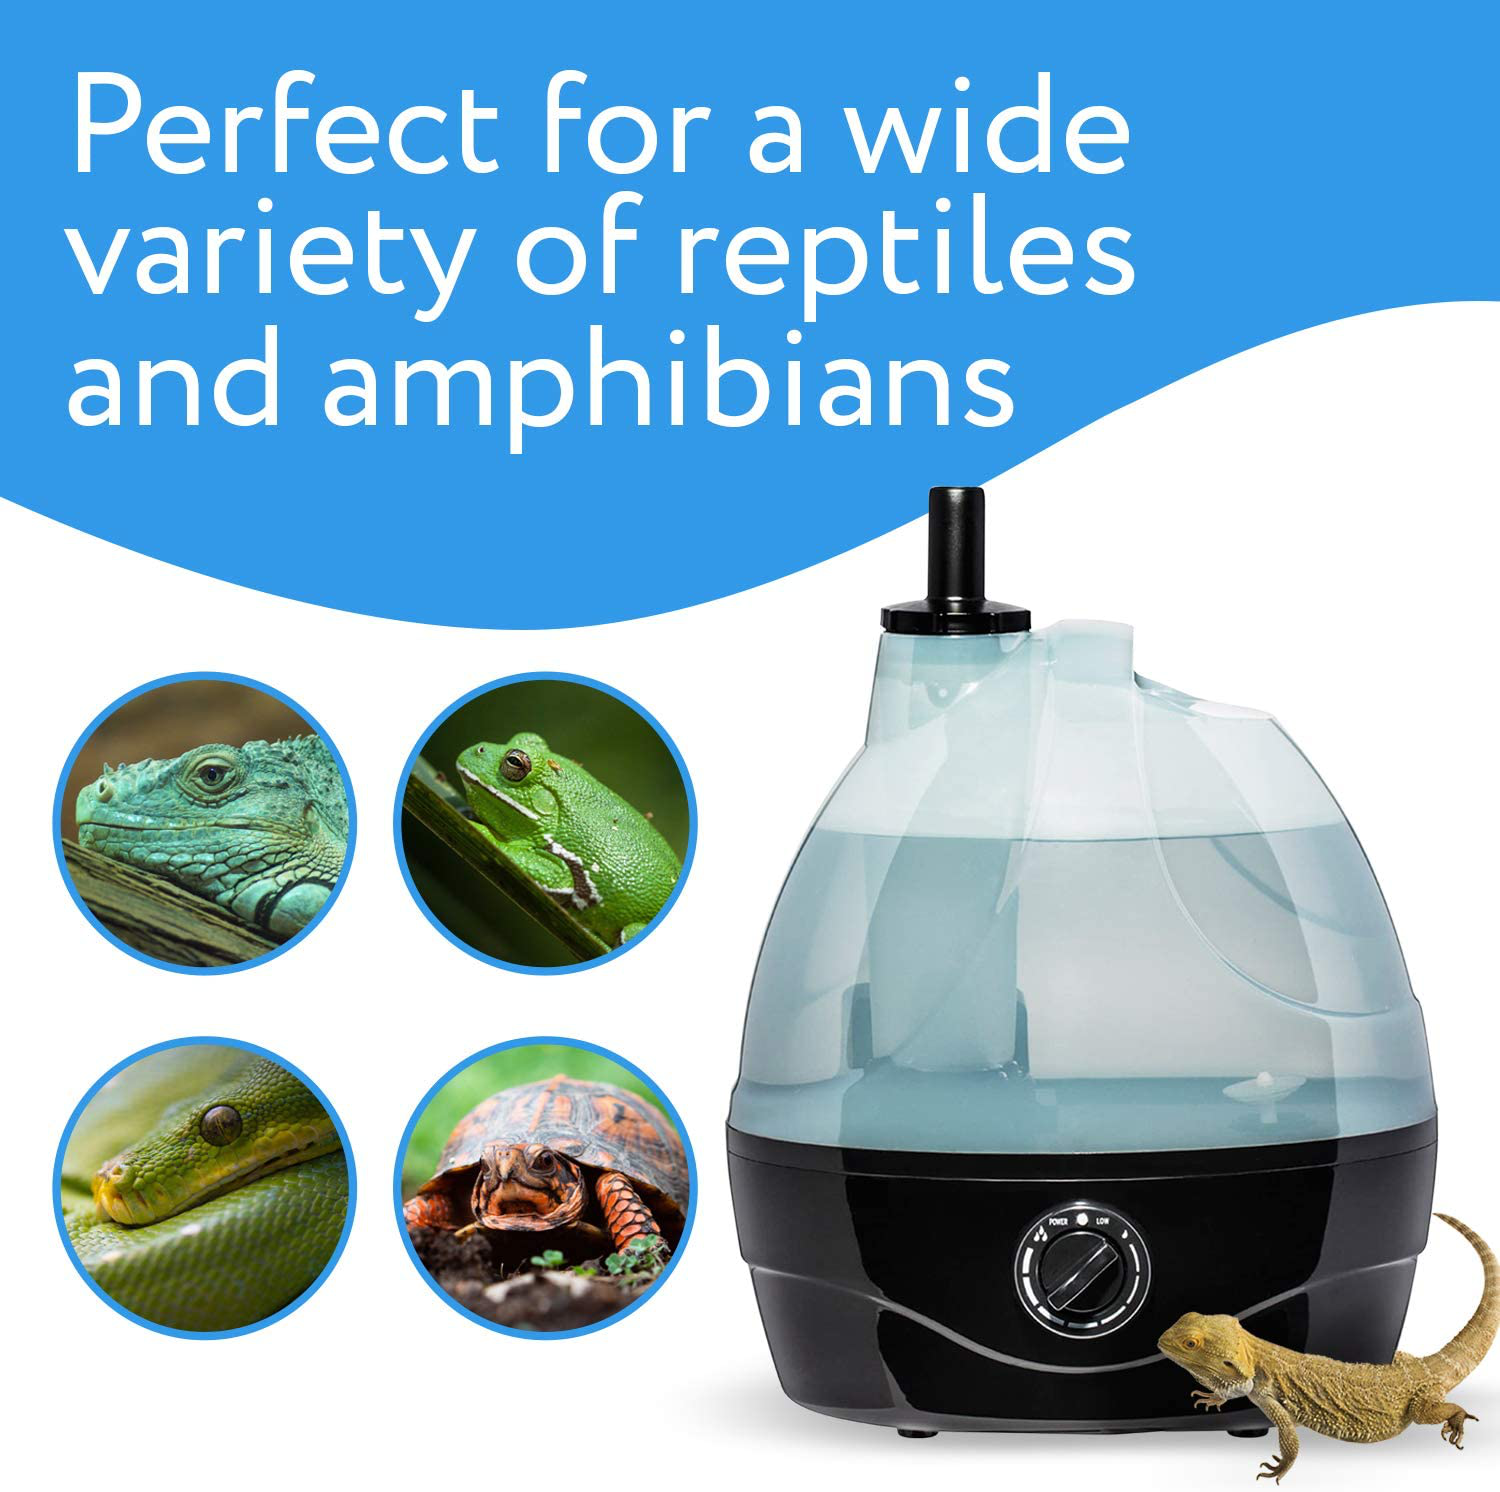 Reptile Humidifier / Fogger - Large Tank - Ideal for a Variety of Reptiles / Amphibians / Herps - Compatible with All Terrariums and Enclosures - by Evergreen Pet Supplies